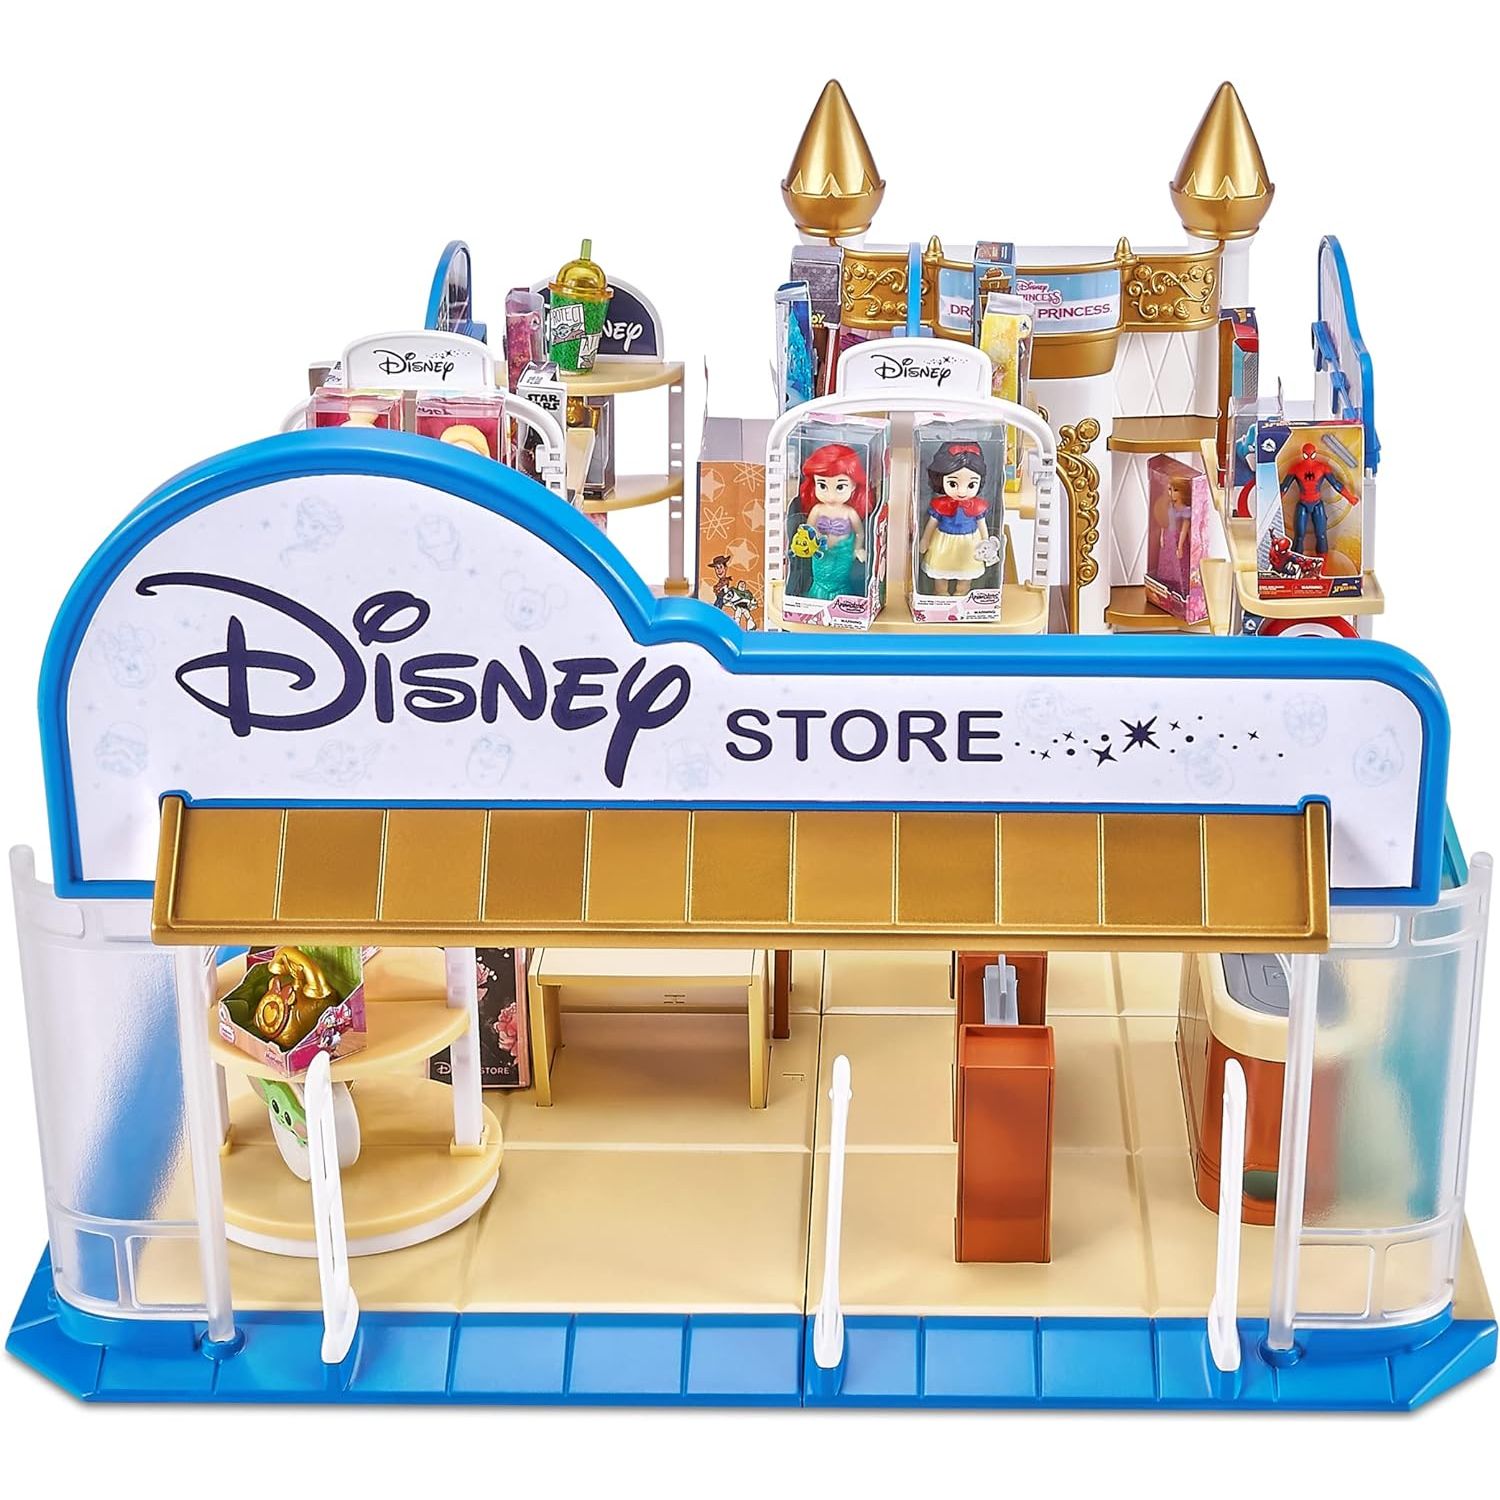 5 Surprise Mini Brands Disney Toy Store Playset by Zuru - Includes 5 Exclusive Mystery Mini's, Store and Display Mini Collectibles for Kids